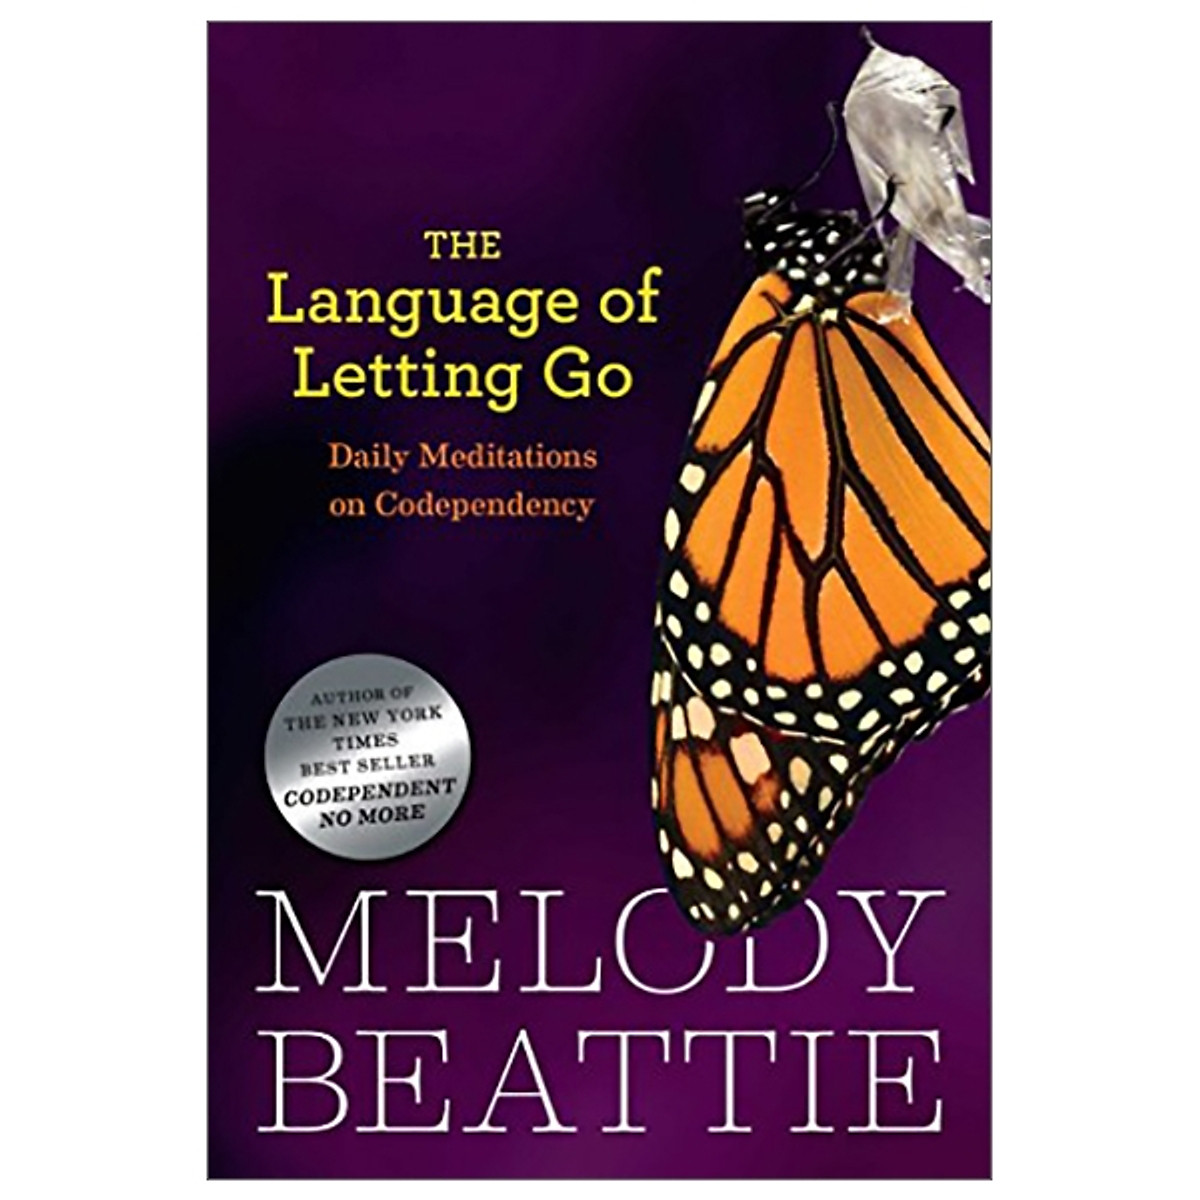 The Language of Letting Go: Daily Meditations on Codependency